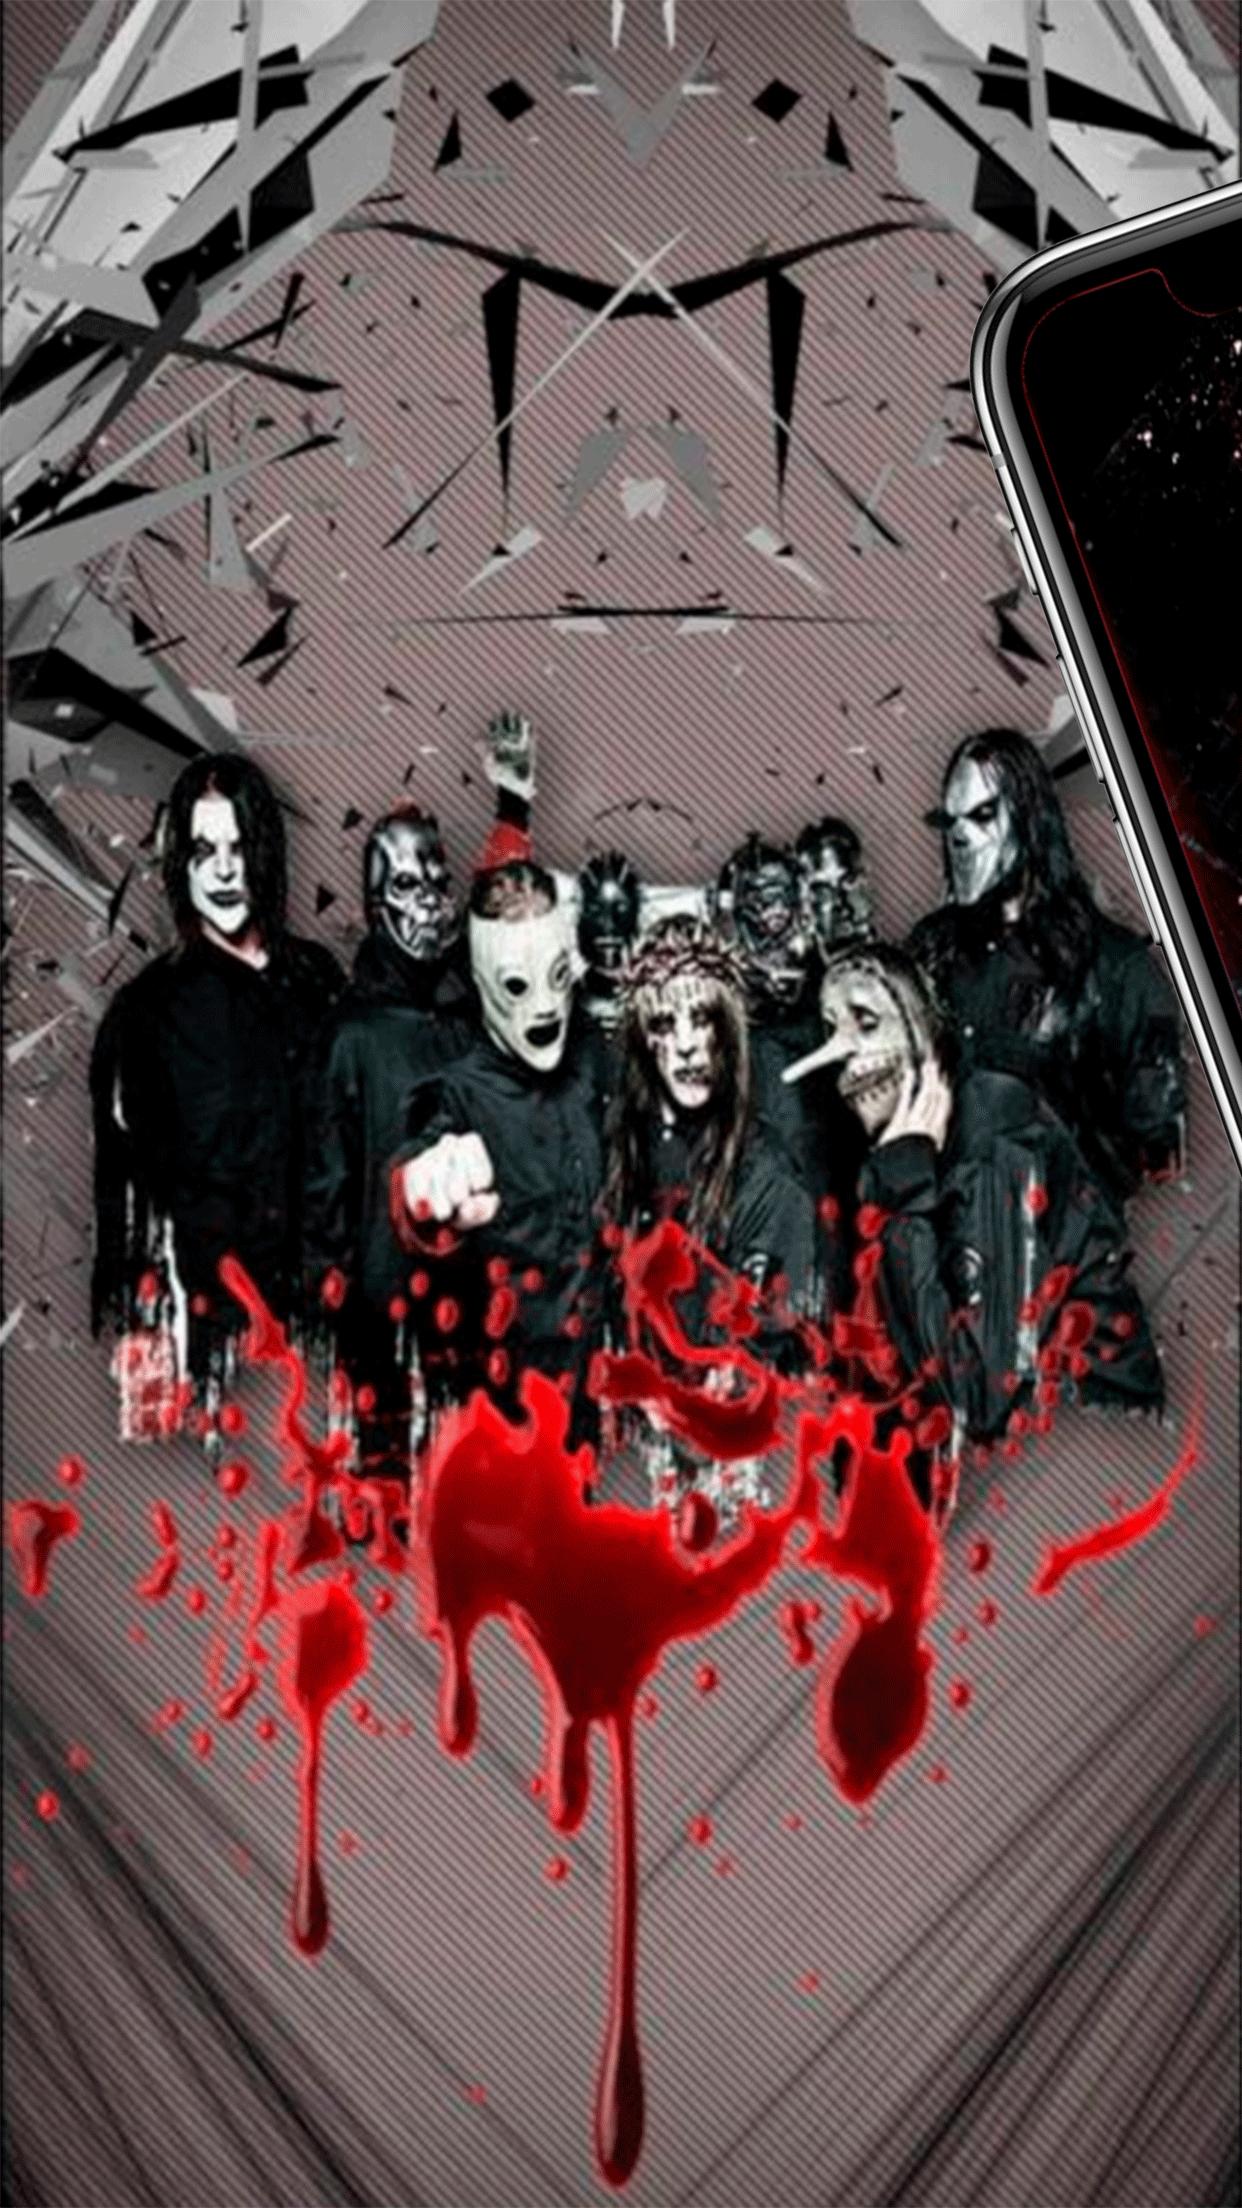 Android 用の Slipknot Wallpaper Hd And Backgrounds Free Apk をダウンロード